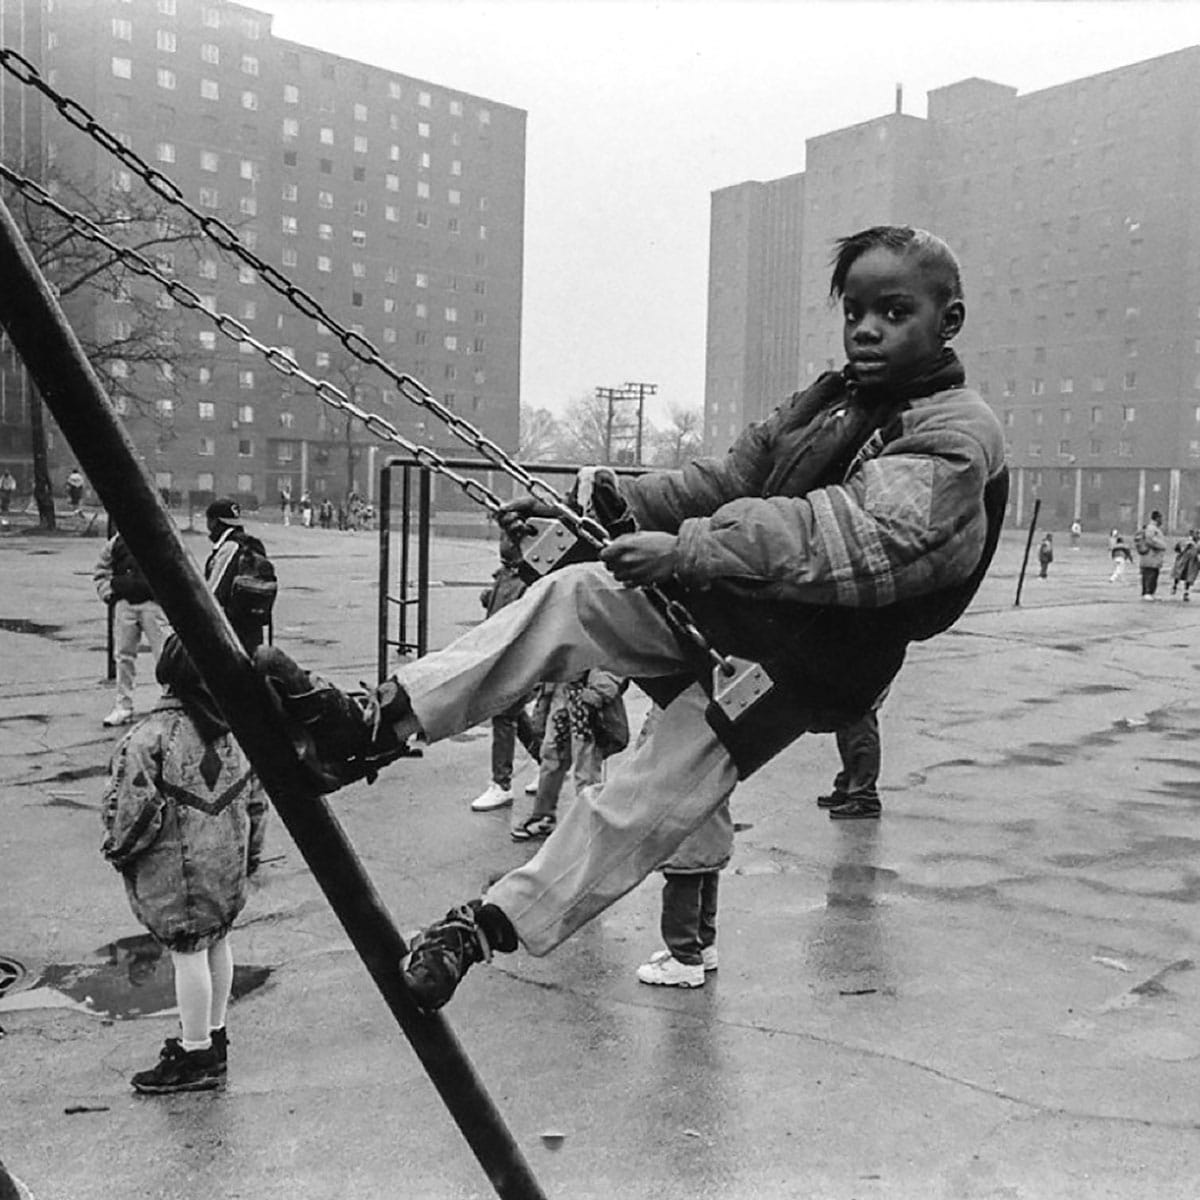 Children playing on asphalt with child on swing in foreground